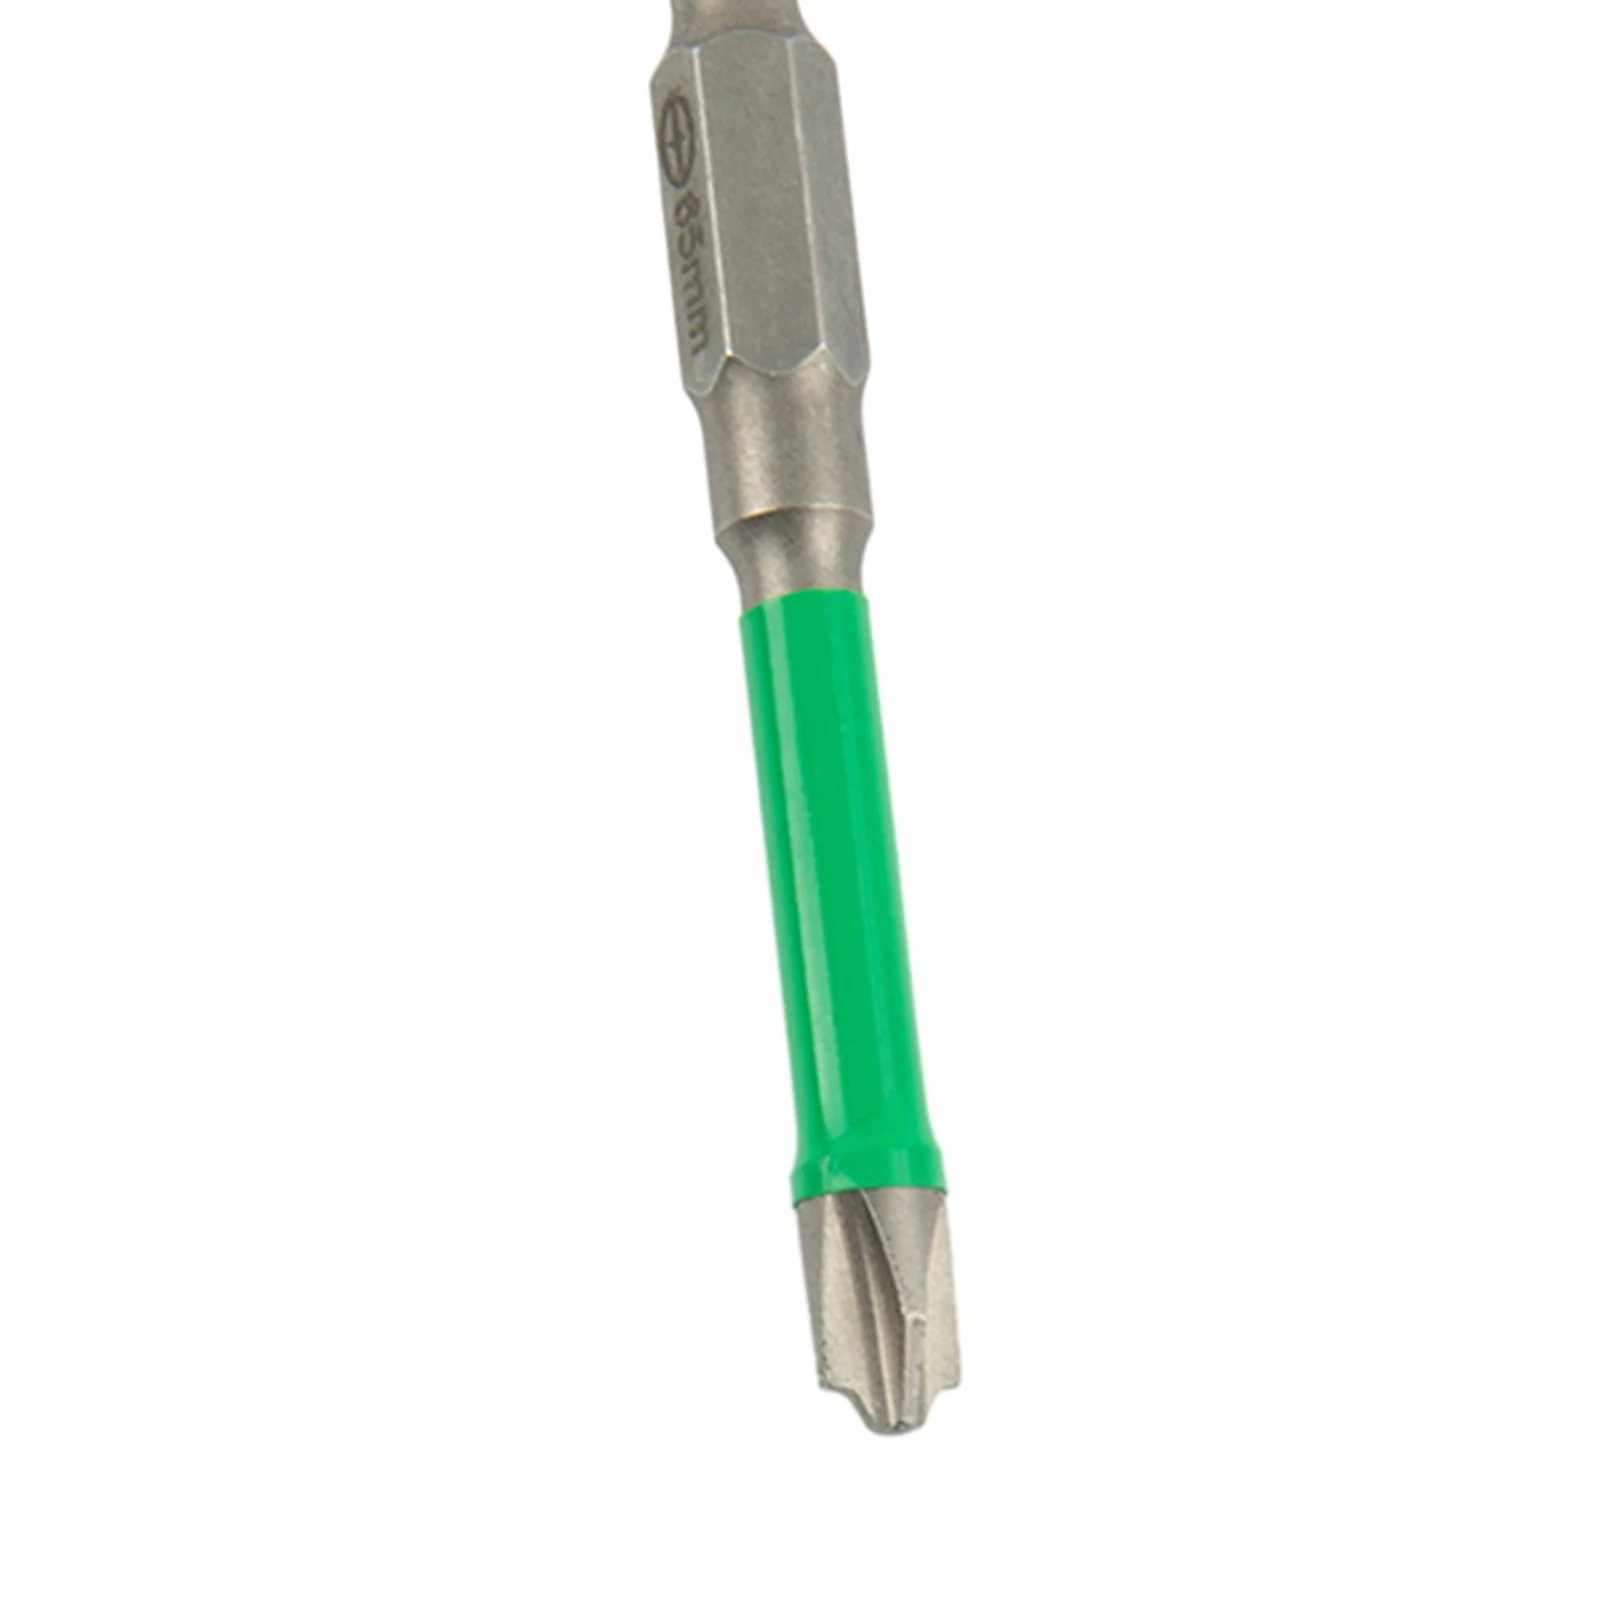 High Hardness Magnetic Special Cross Screwdriver Bit FPH2 55mm Head Option for 65mm/110mm or 65mm+110mm Length 65mm 110mm magnetic special slotted cross screwdriver bit for electrician fph2 circuit breakers electrical electrician tools